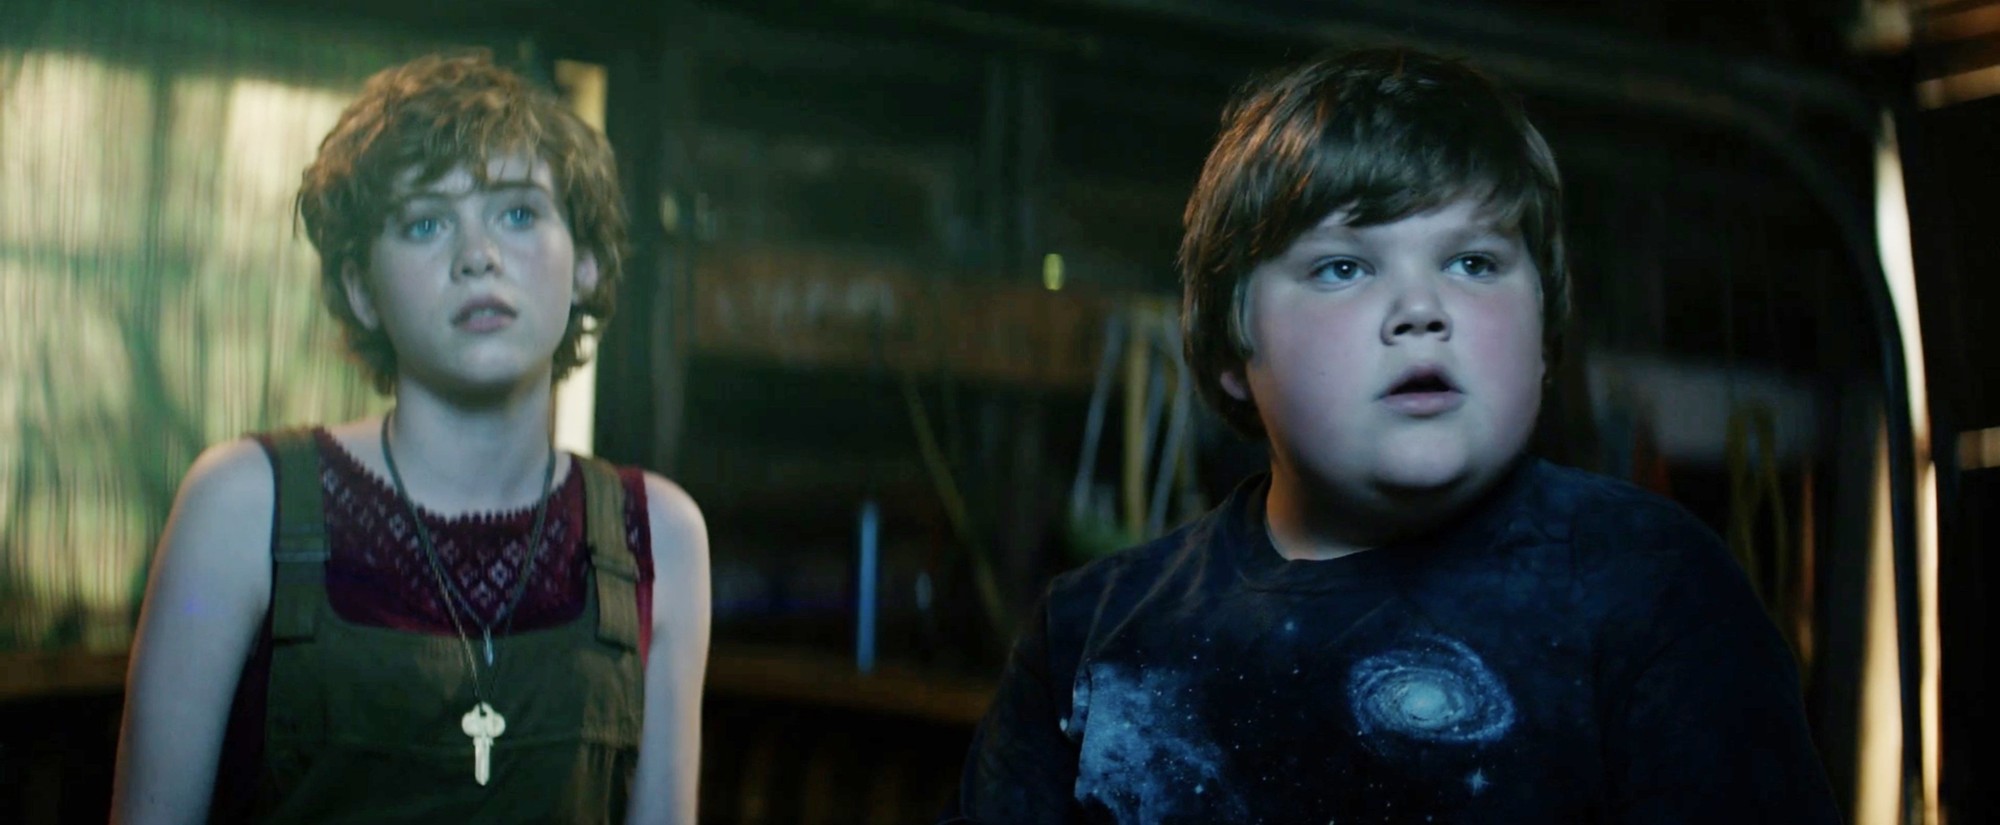 Sophia Lillis stars as Beverly Marsh and Jeremy Ray Taylor stars as Ben Hanscom in Warner Bros. Pictures' It (2017)